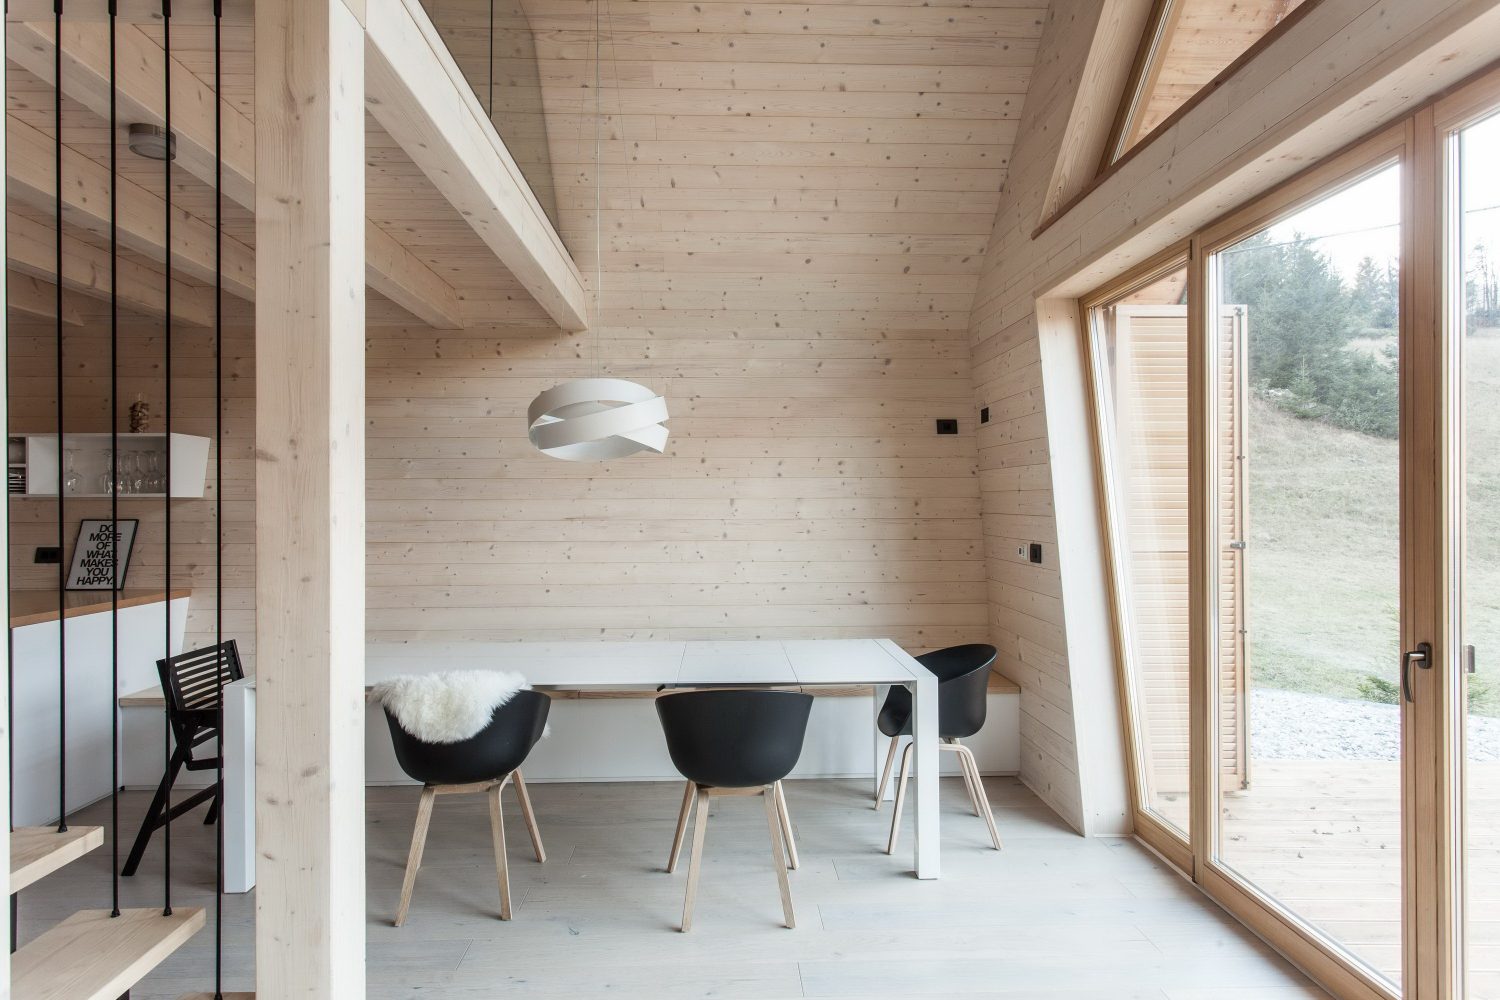 The Wooden House by Studio Pikaplus